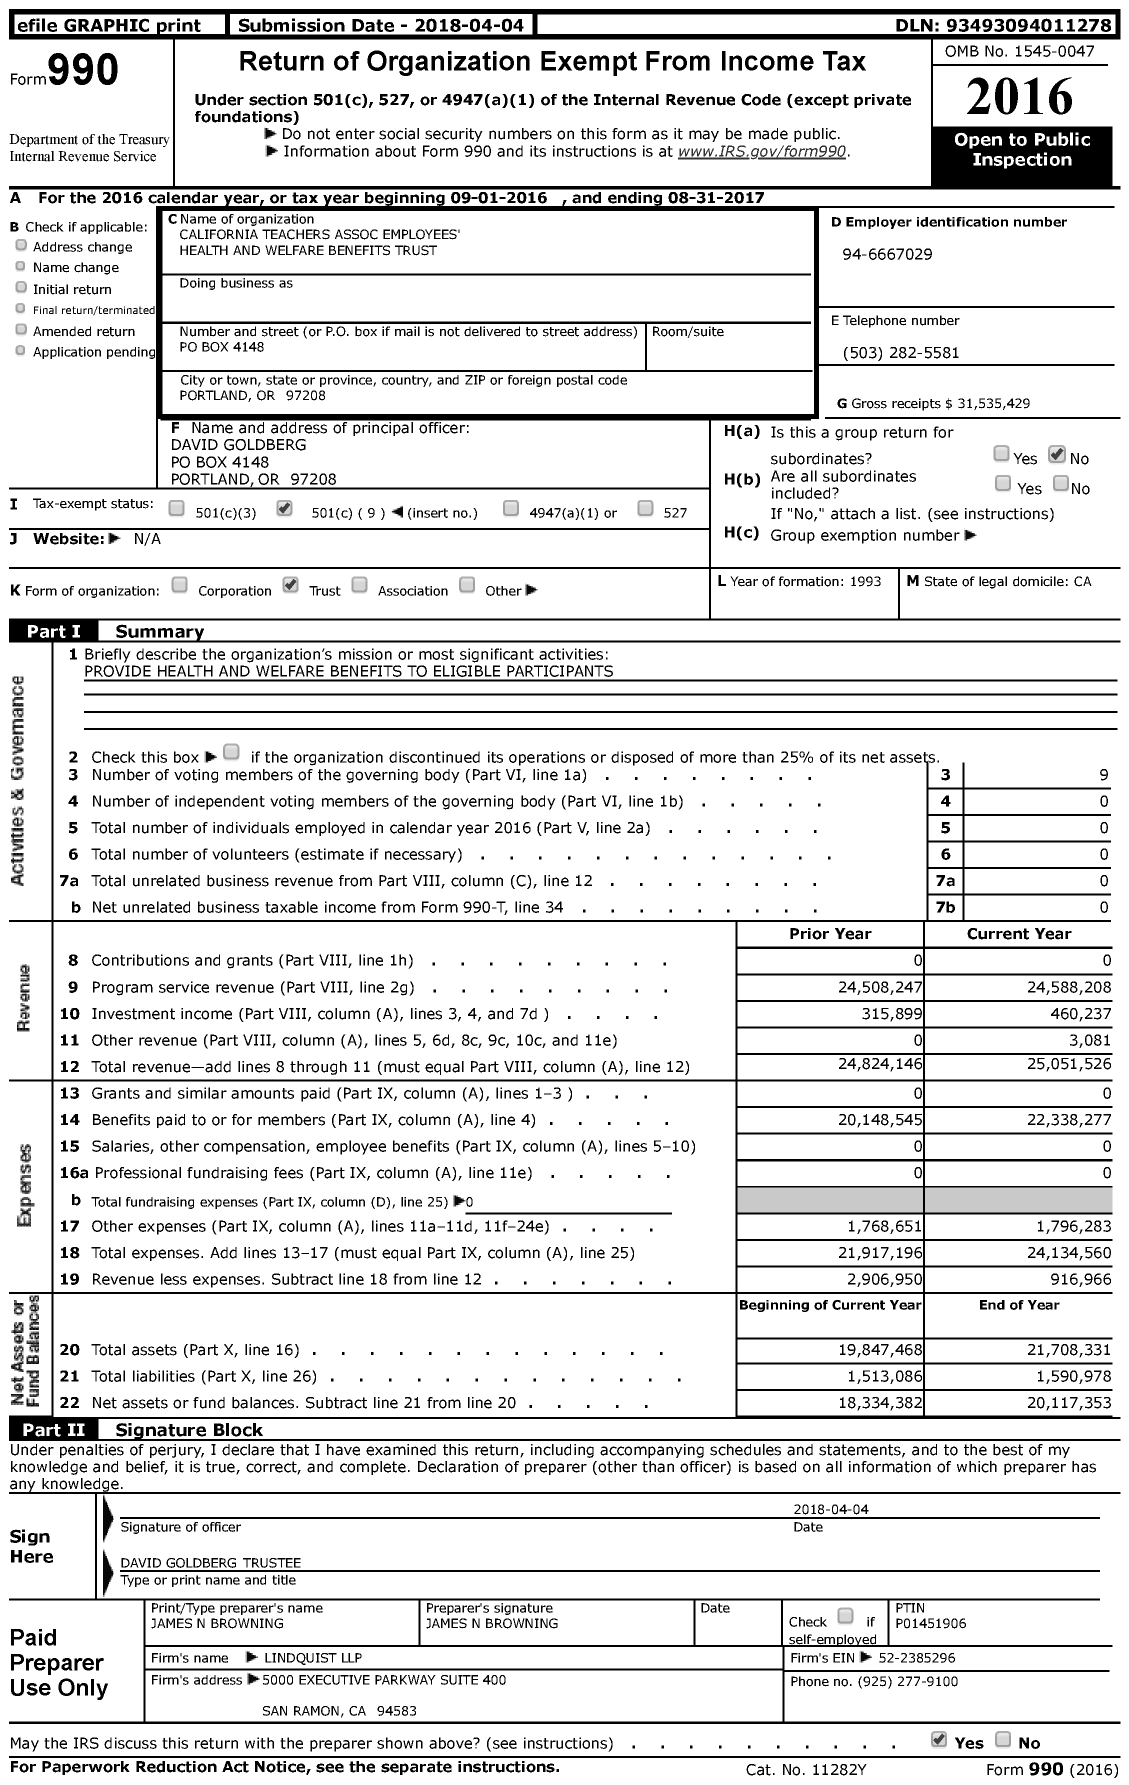 Image of first page of 2016 Form 990 for California Teachers Association Employees' Health and Welfare Benefits Trust